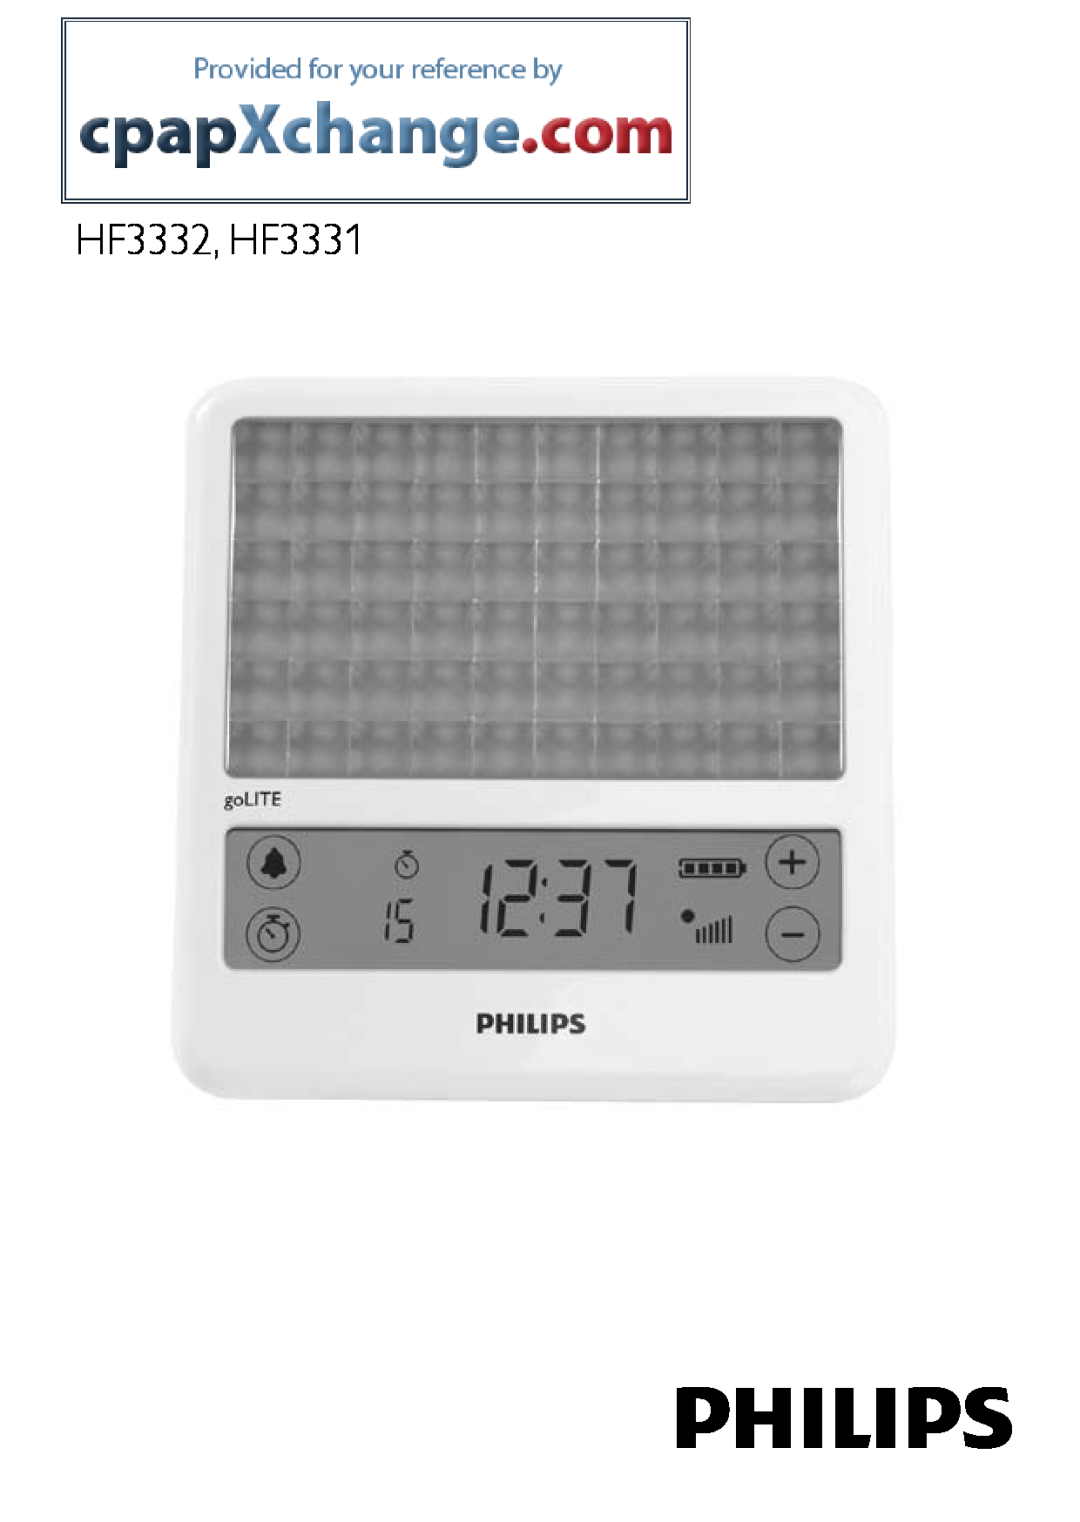 Philips manual HF3332, HF3331, Register your product and get support at 